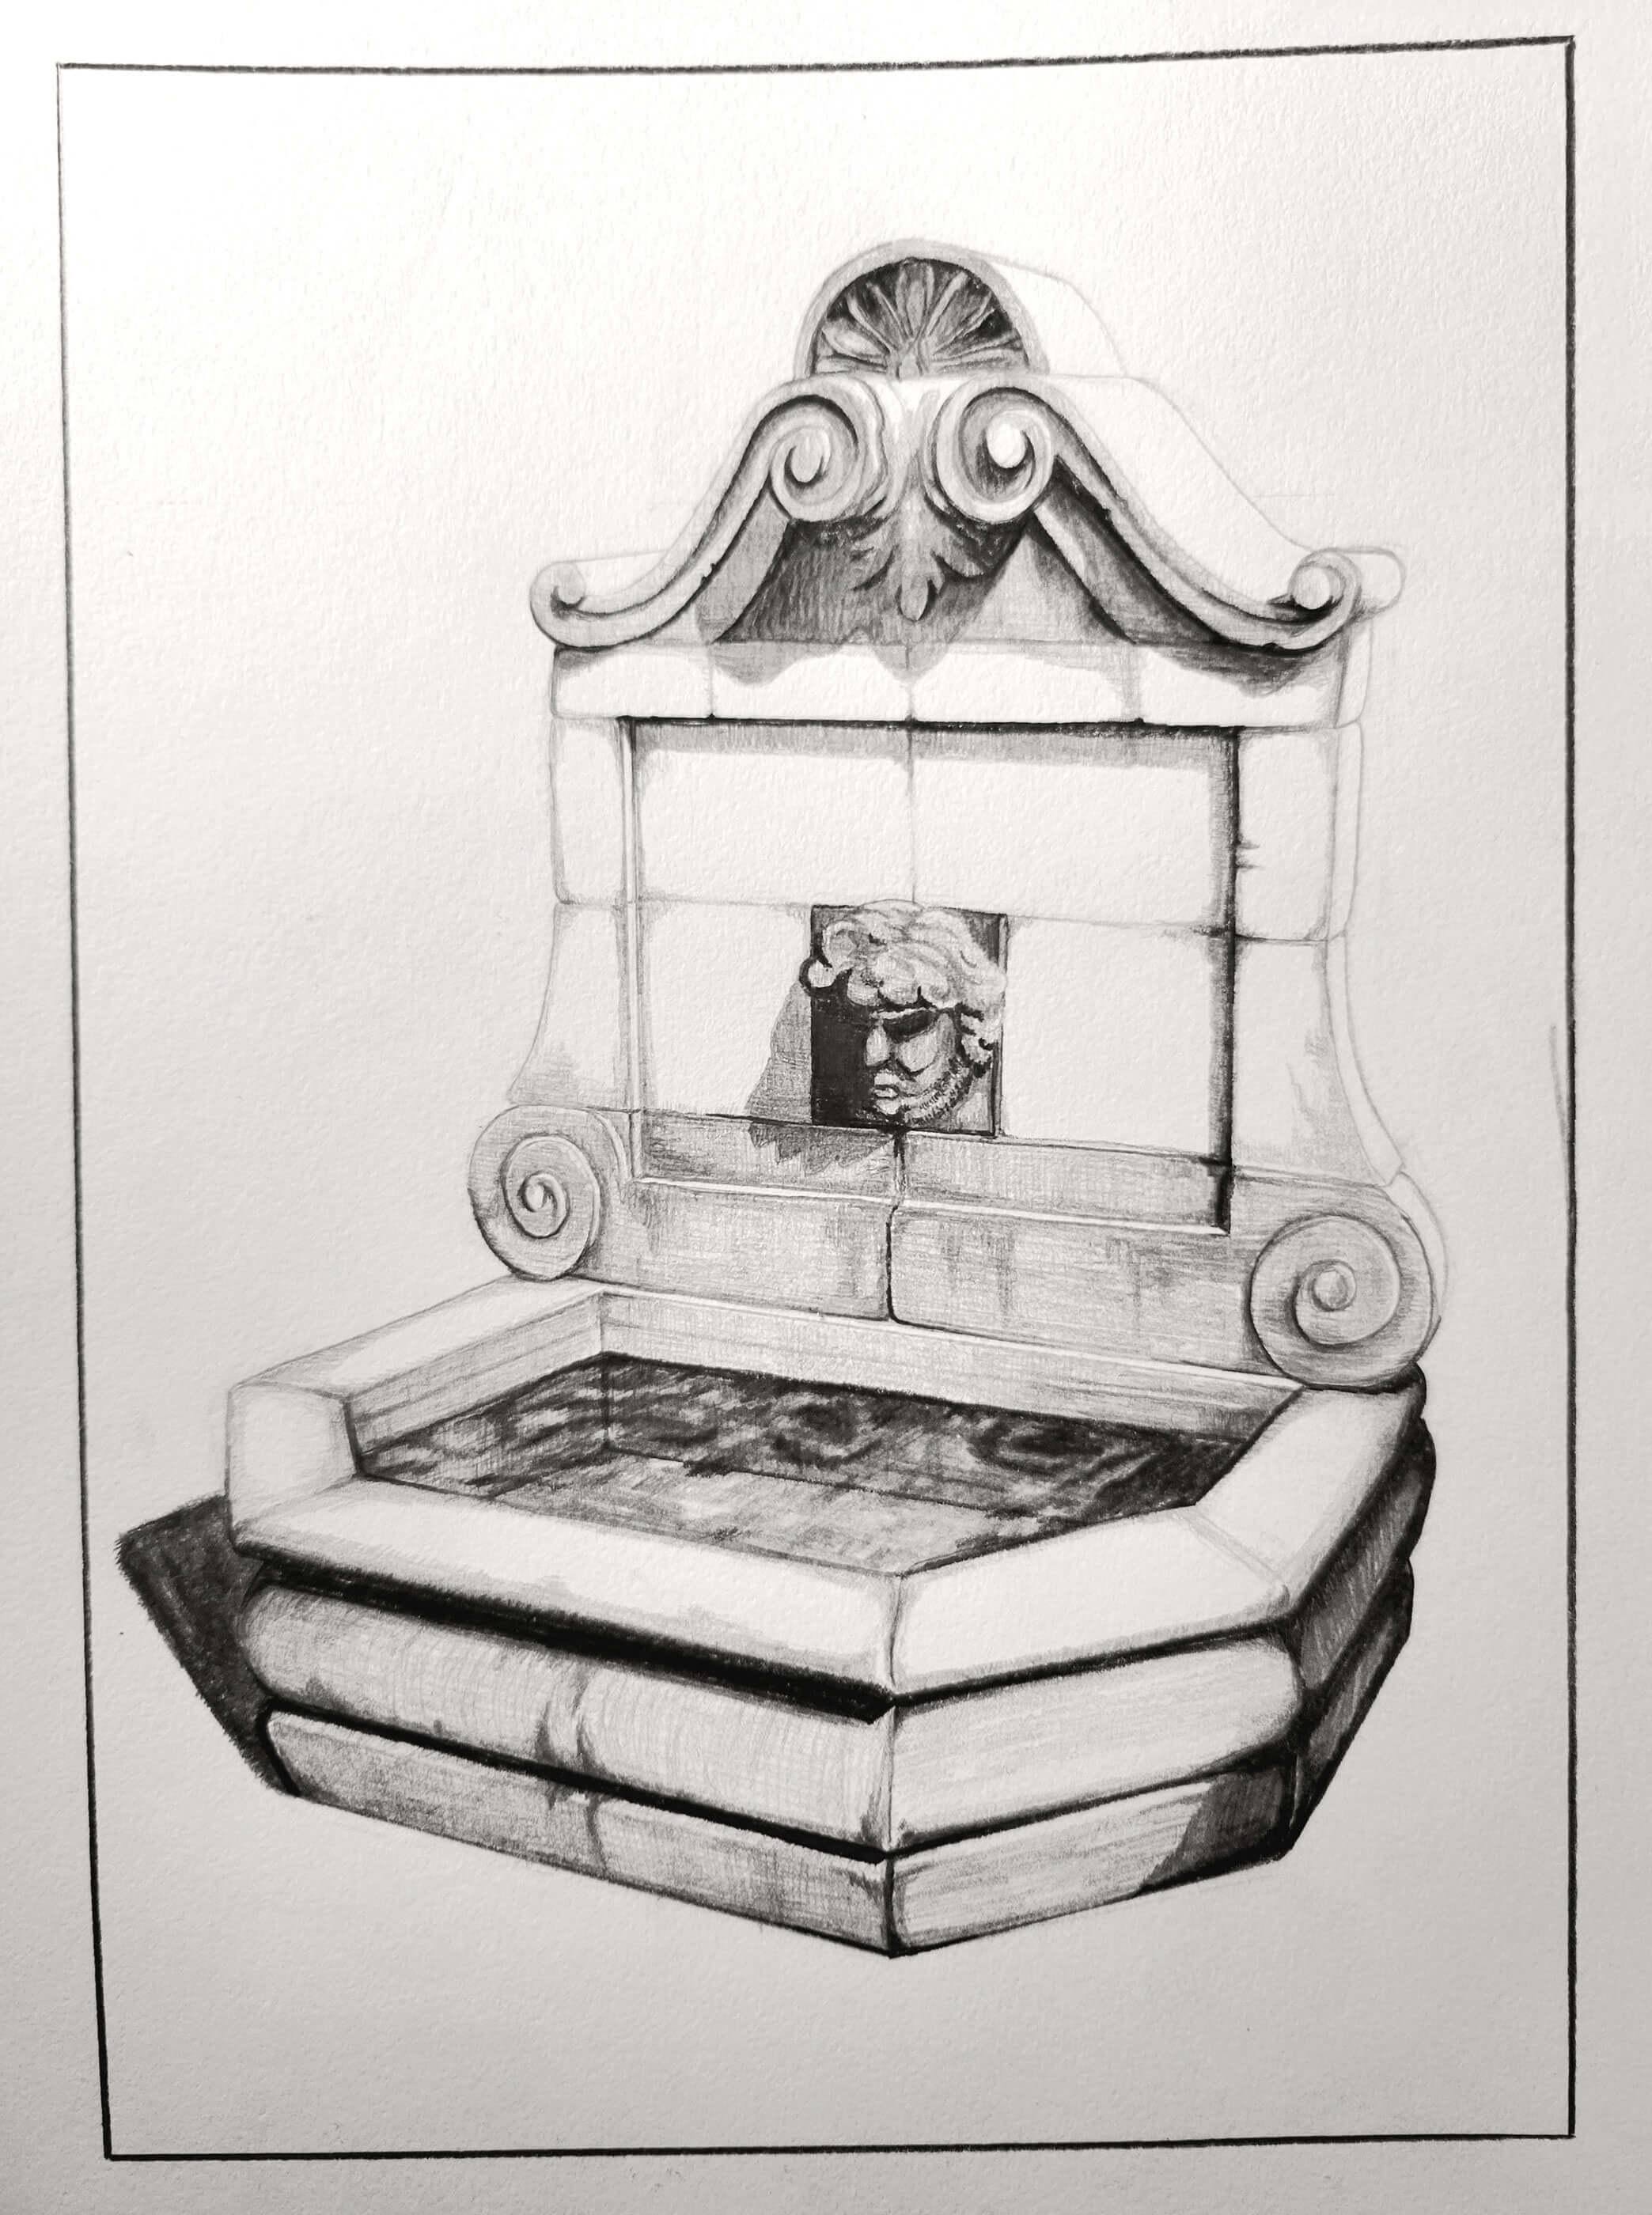 Sketch of an intricately sculpted fountain.